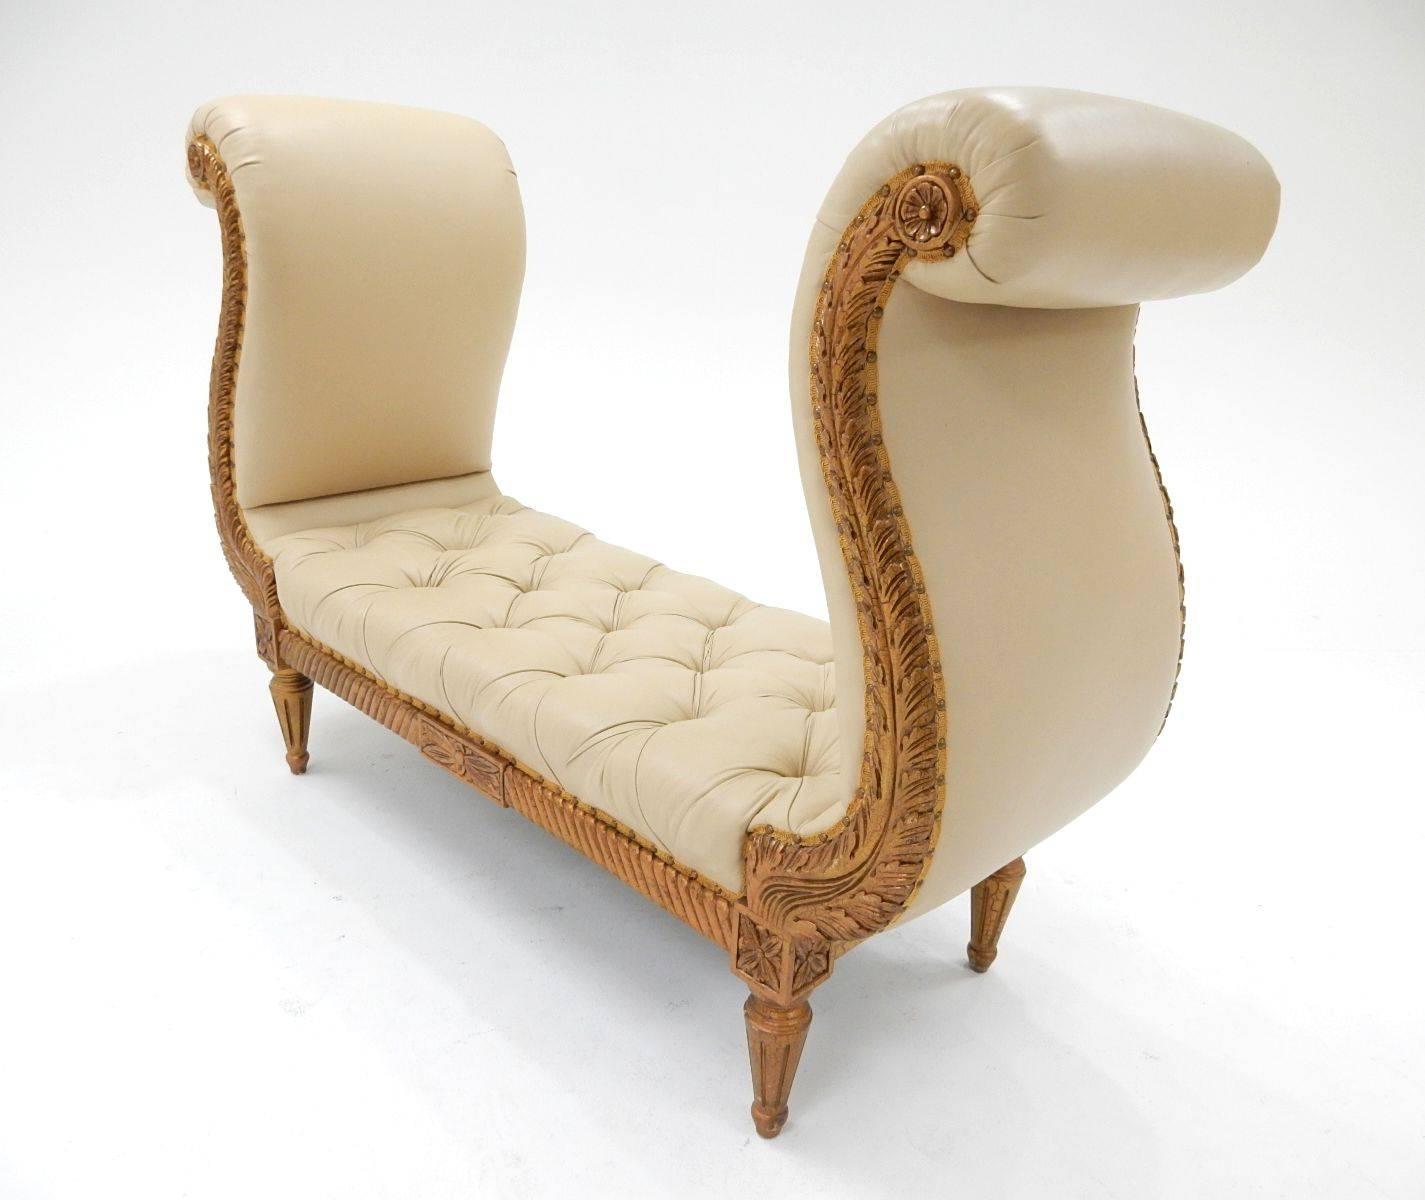 Simply stupendous! The exaggerated "wing" arms on these piece stand over 4 feet tall.
Upholstered in buttery soft tan leather trimmed in nailheads. Gilded wood frame. Condition is amazing.
Over the top statement piece of functional art.